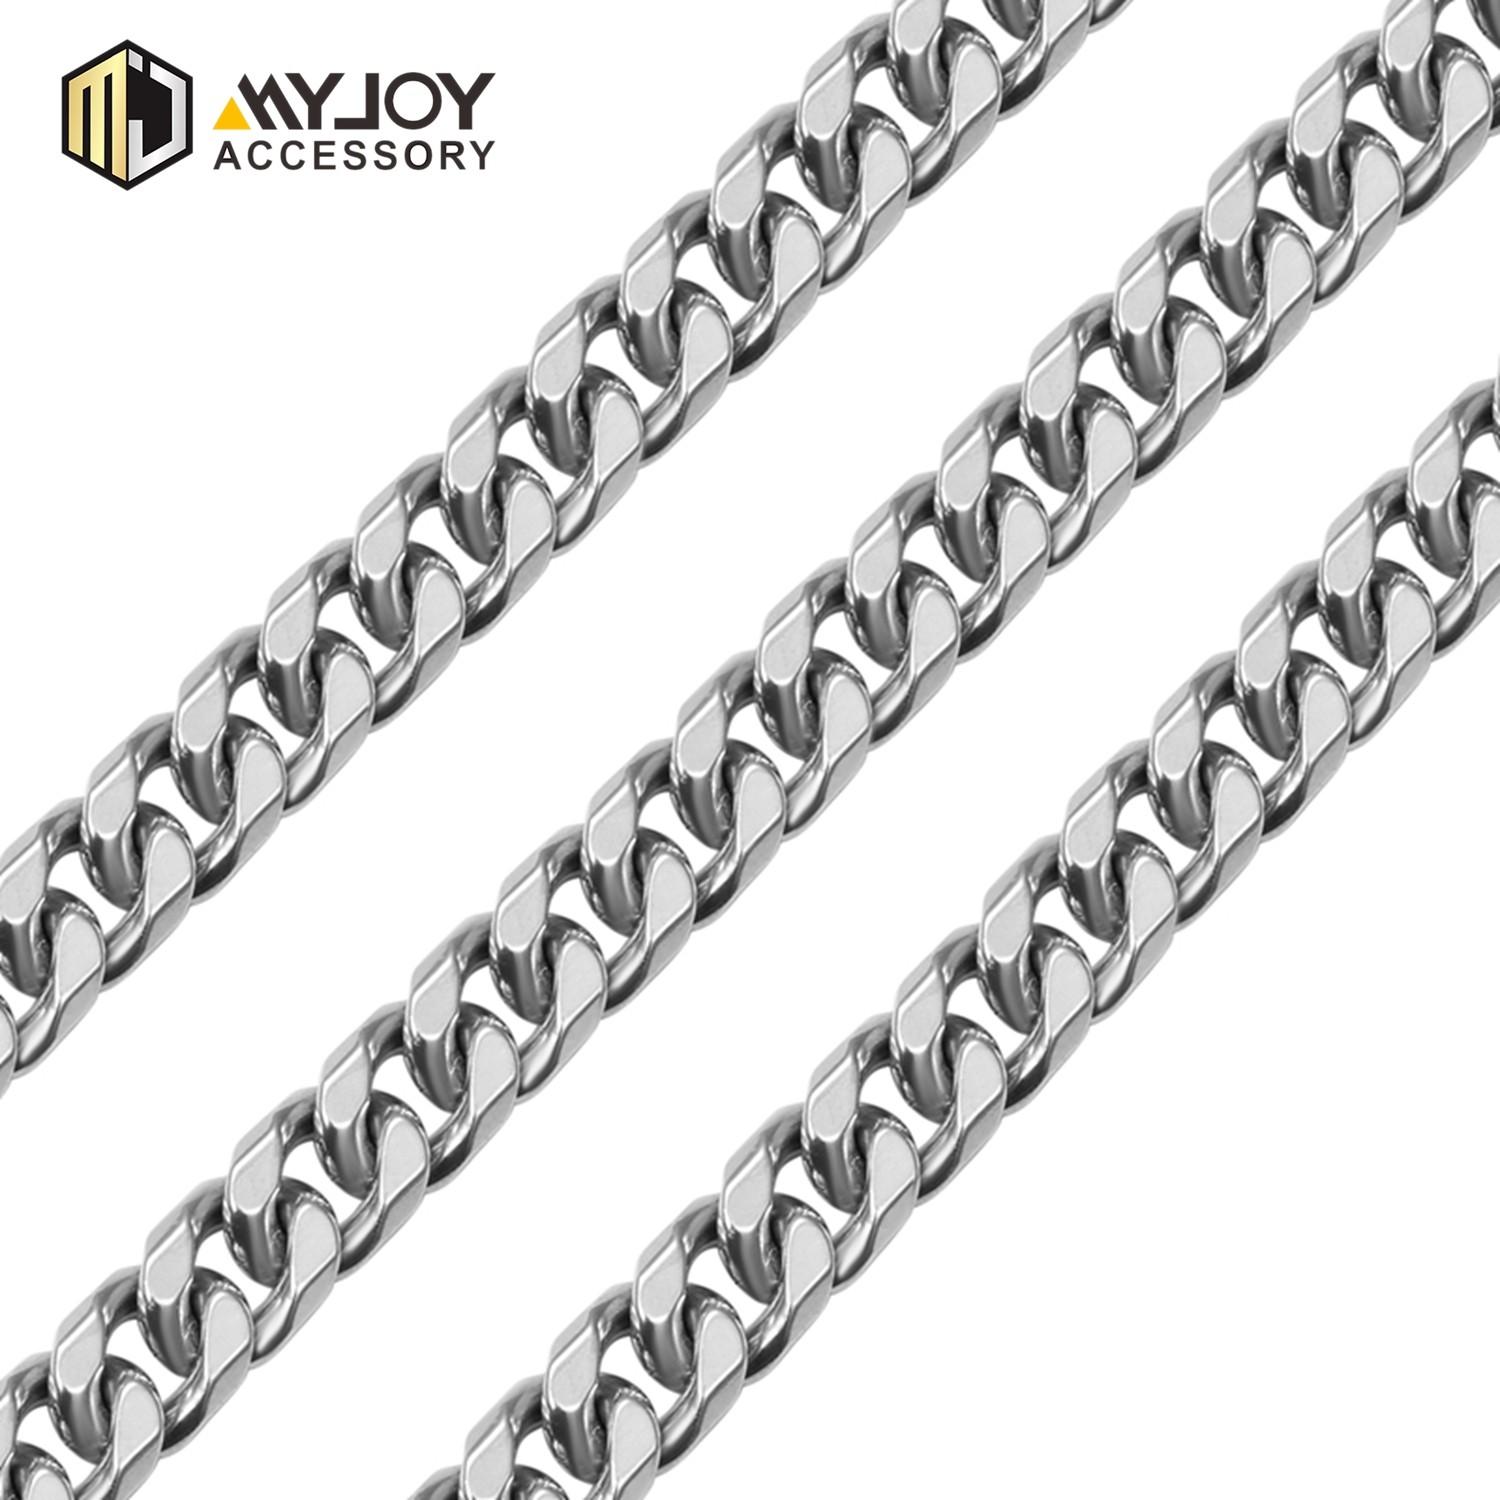 MYJOY Wholesale strap chain Suppliers for handbag-3